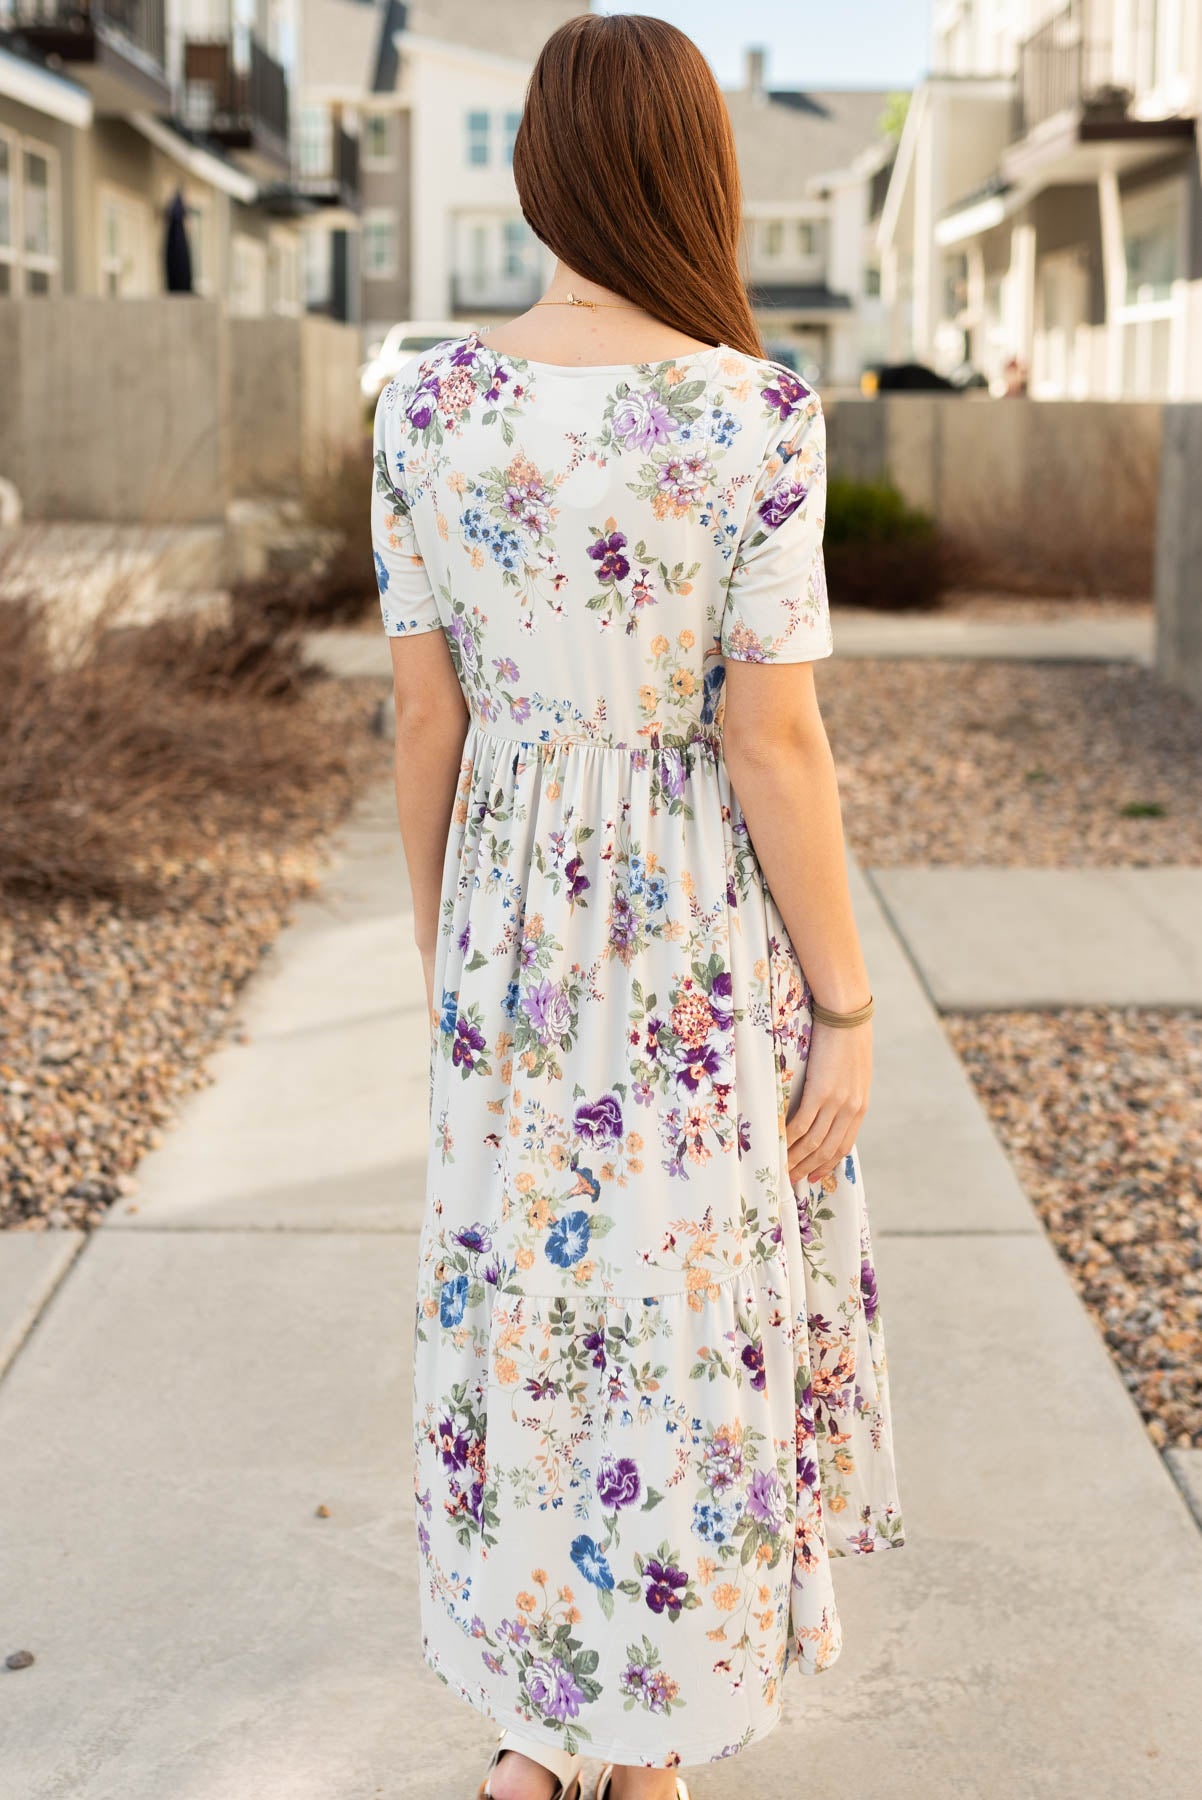 Back view of the grey floral dress